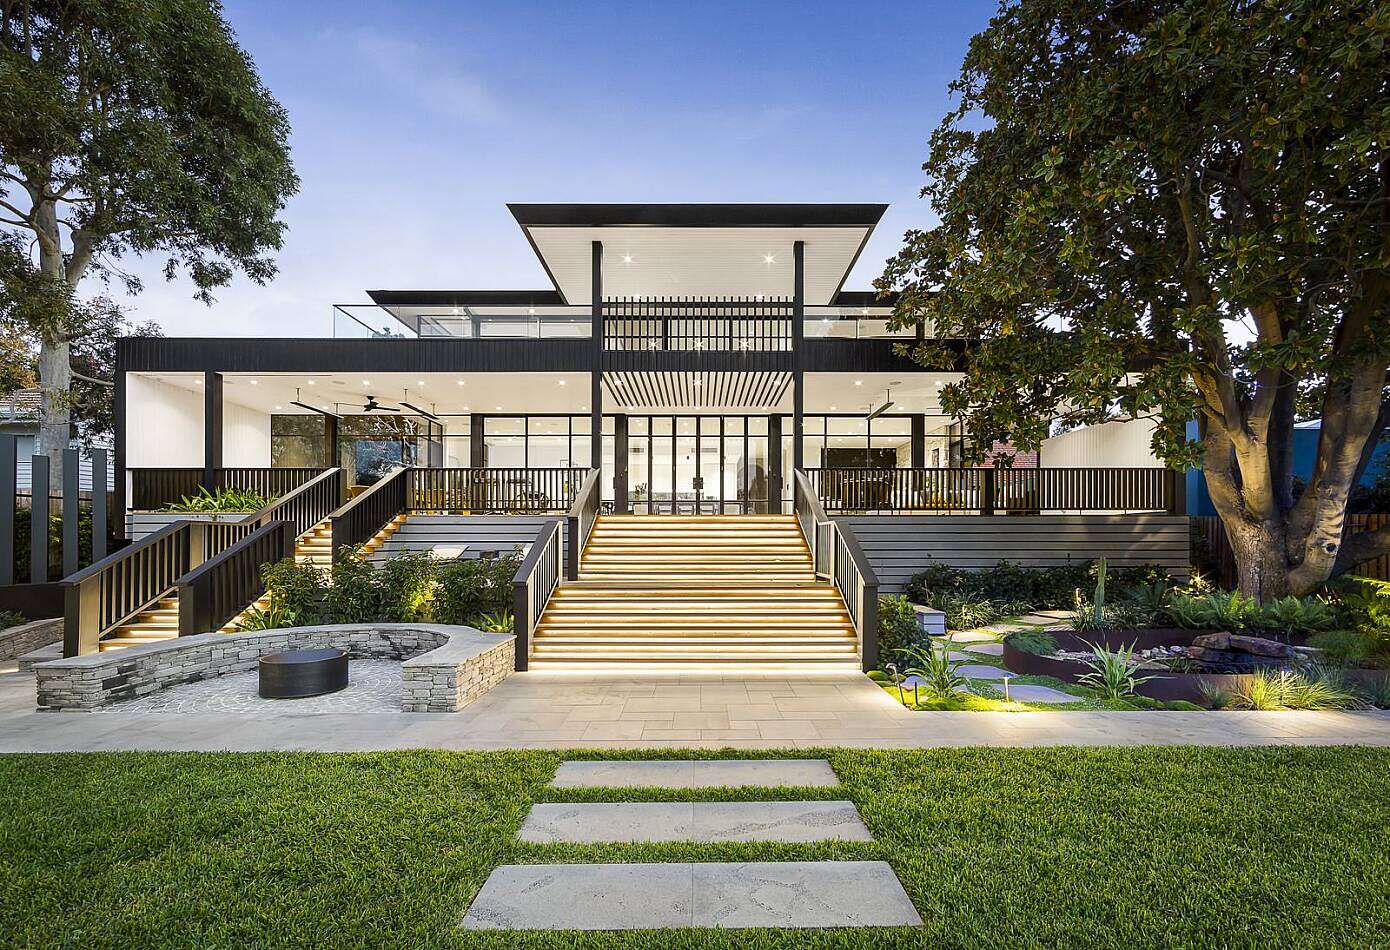 Home in Hampton by Integrated Technologies Australia